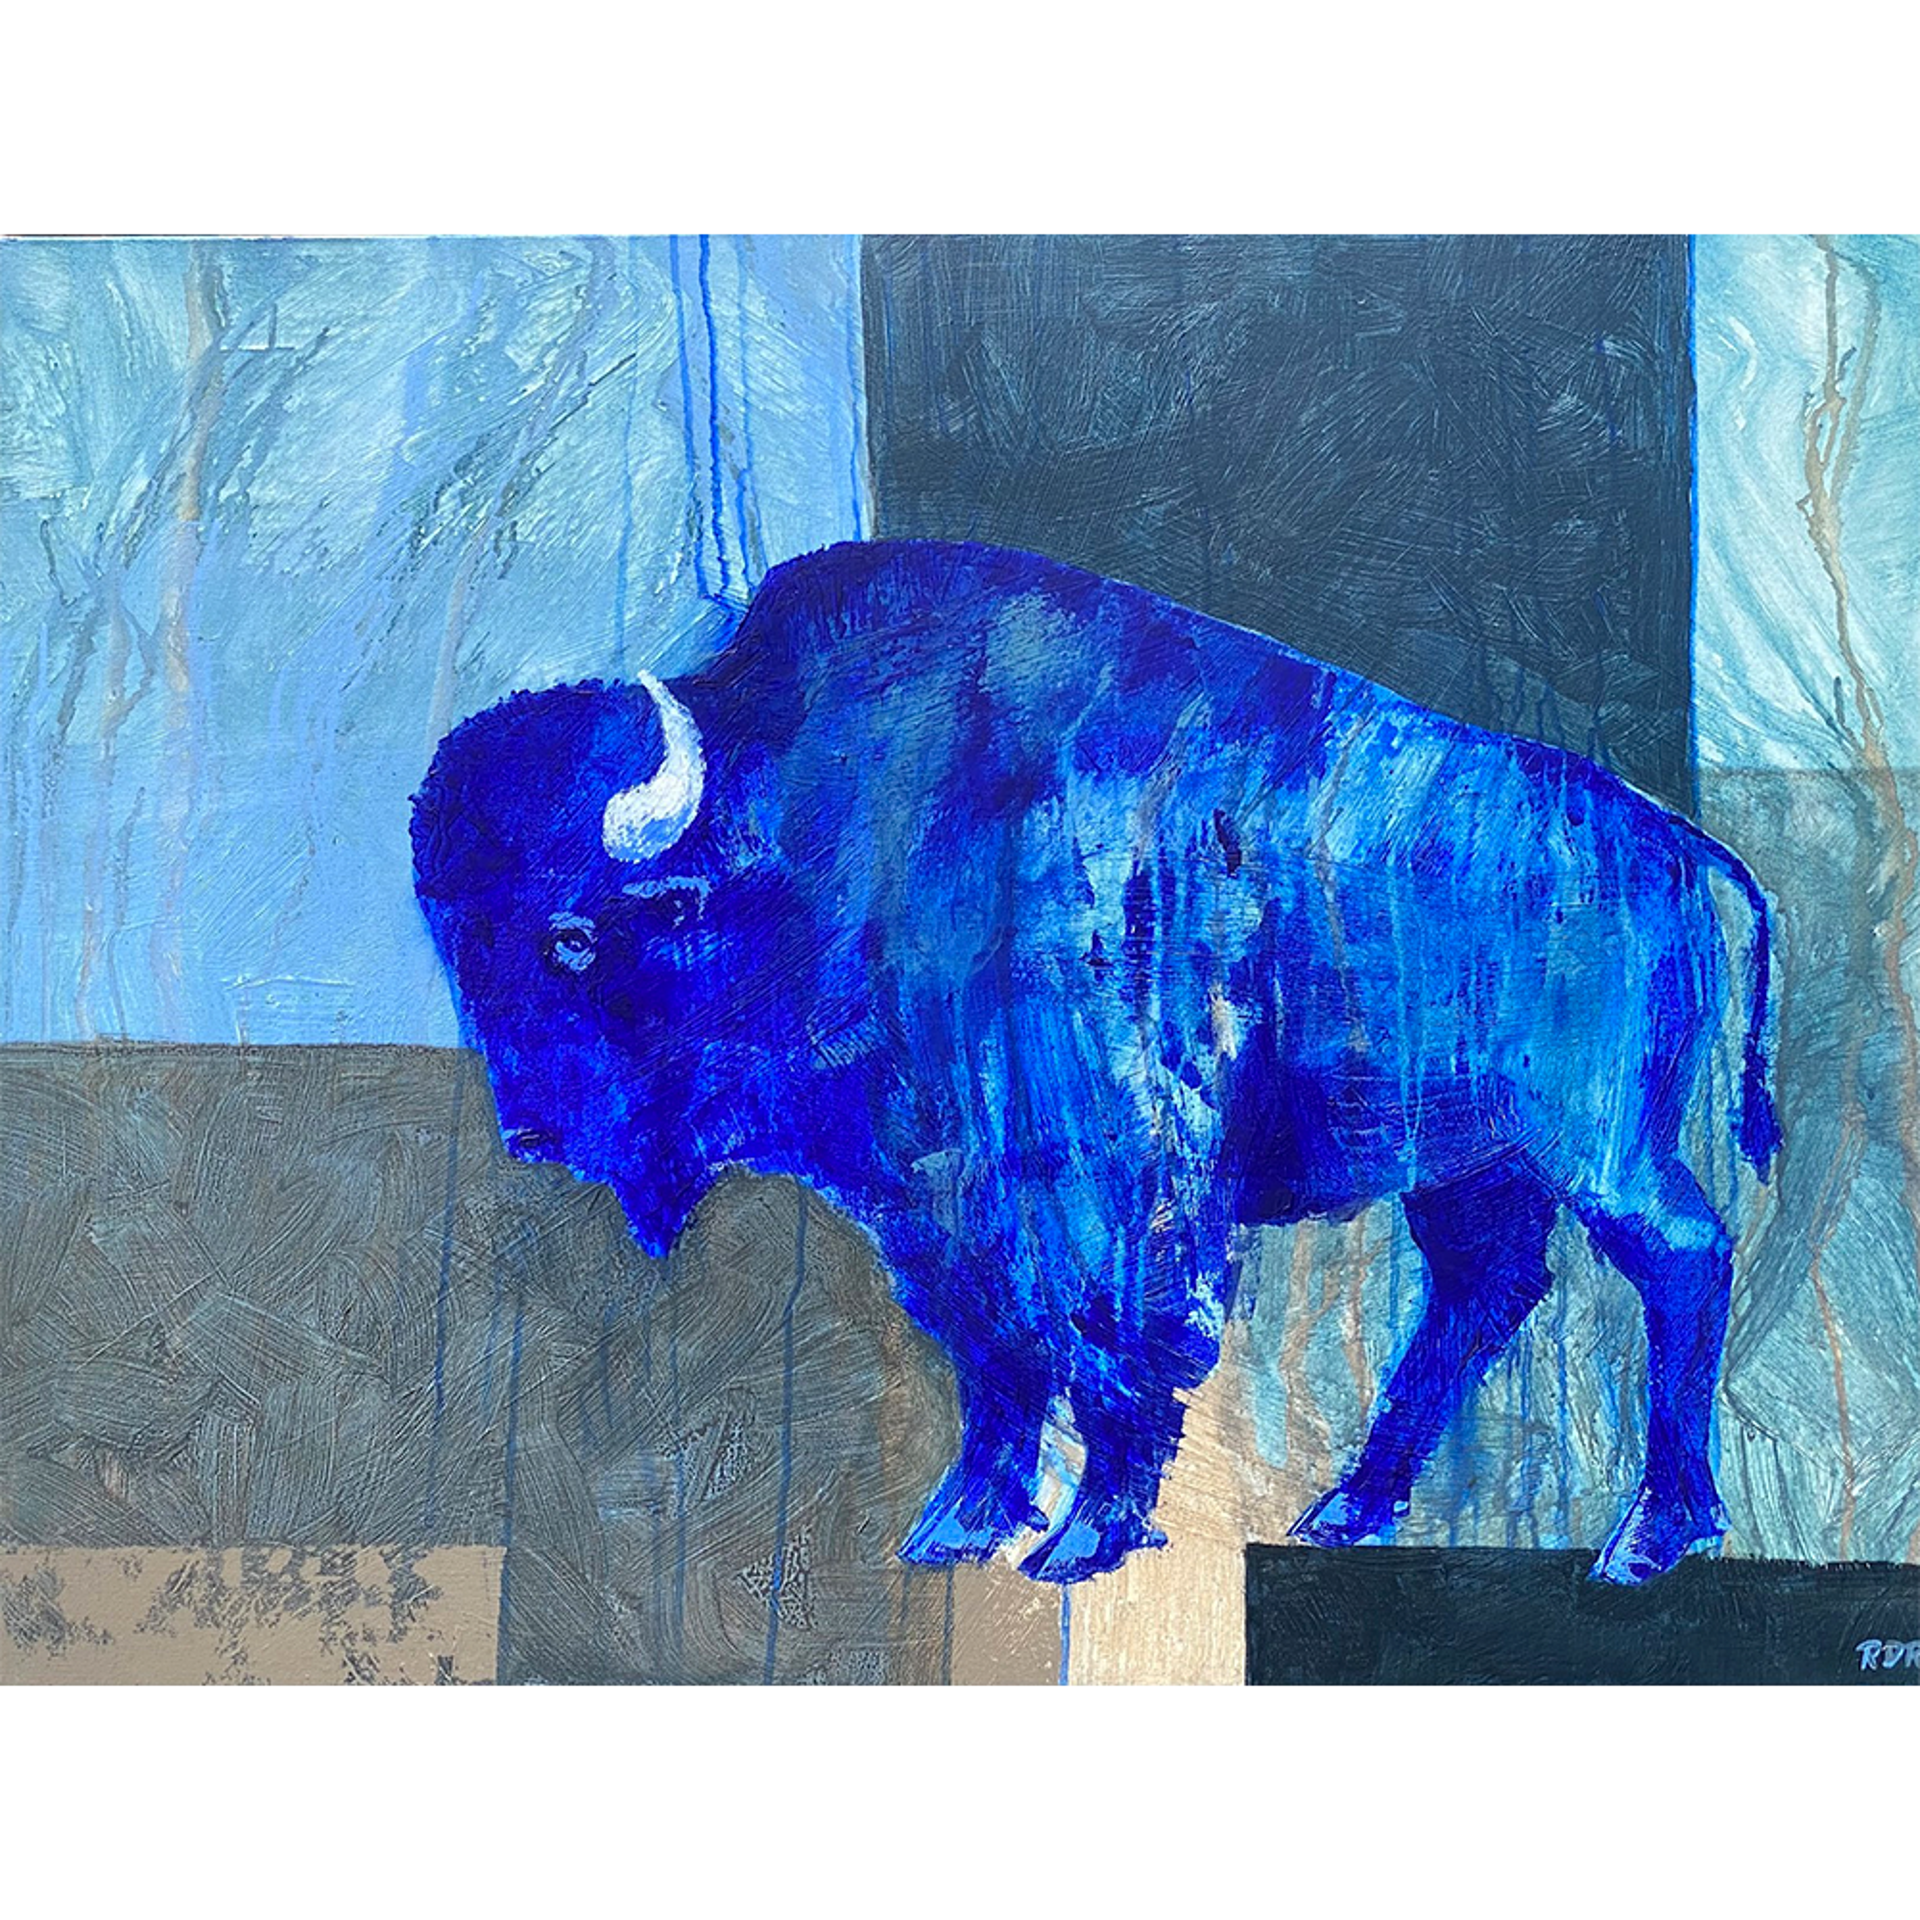 Cold Canyon Bison by Ron Russon